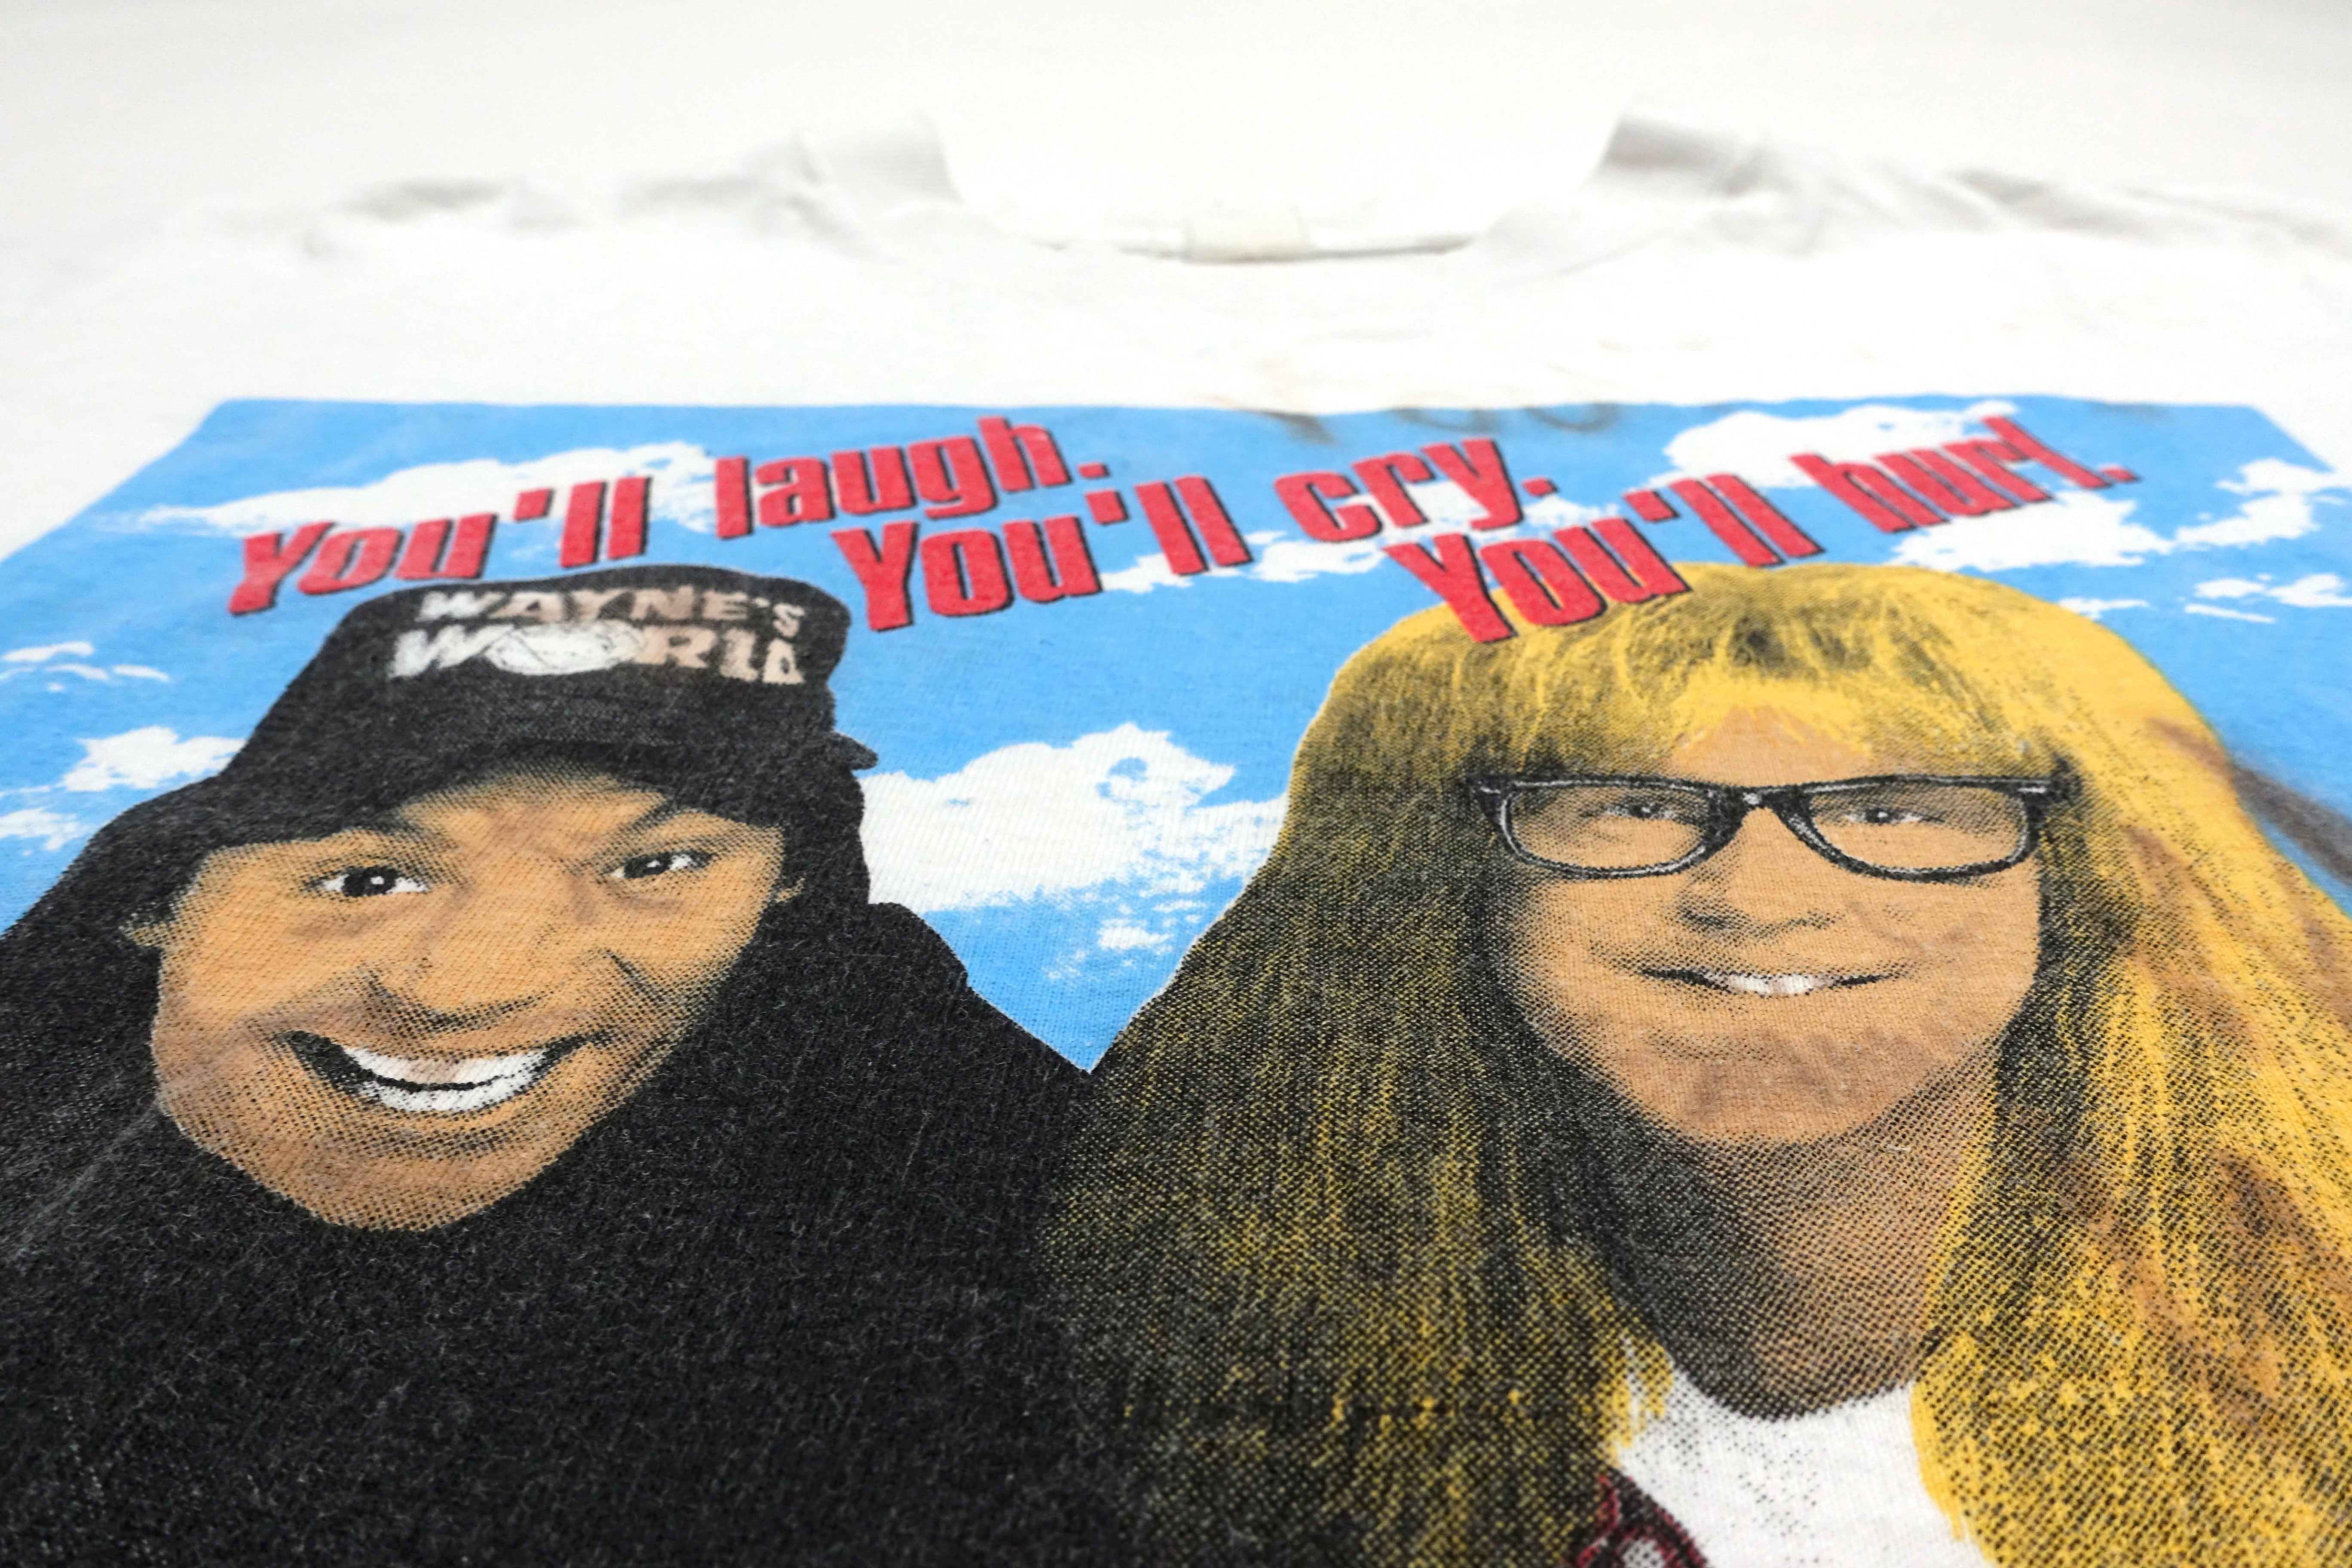 Wayne's World - You'll Laugh, You'll Cry, You'll Hurl Motion Picture Shirt Size Medium